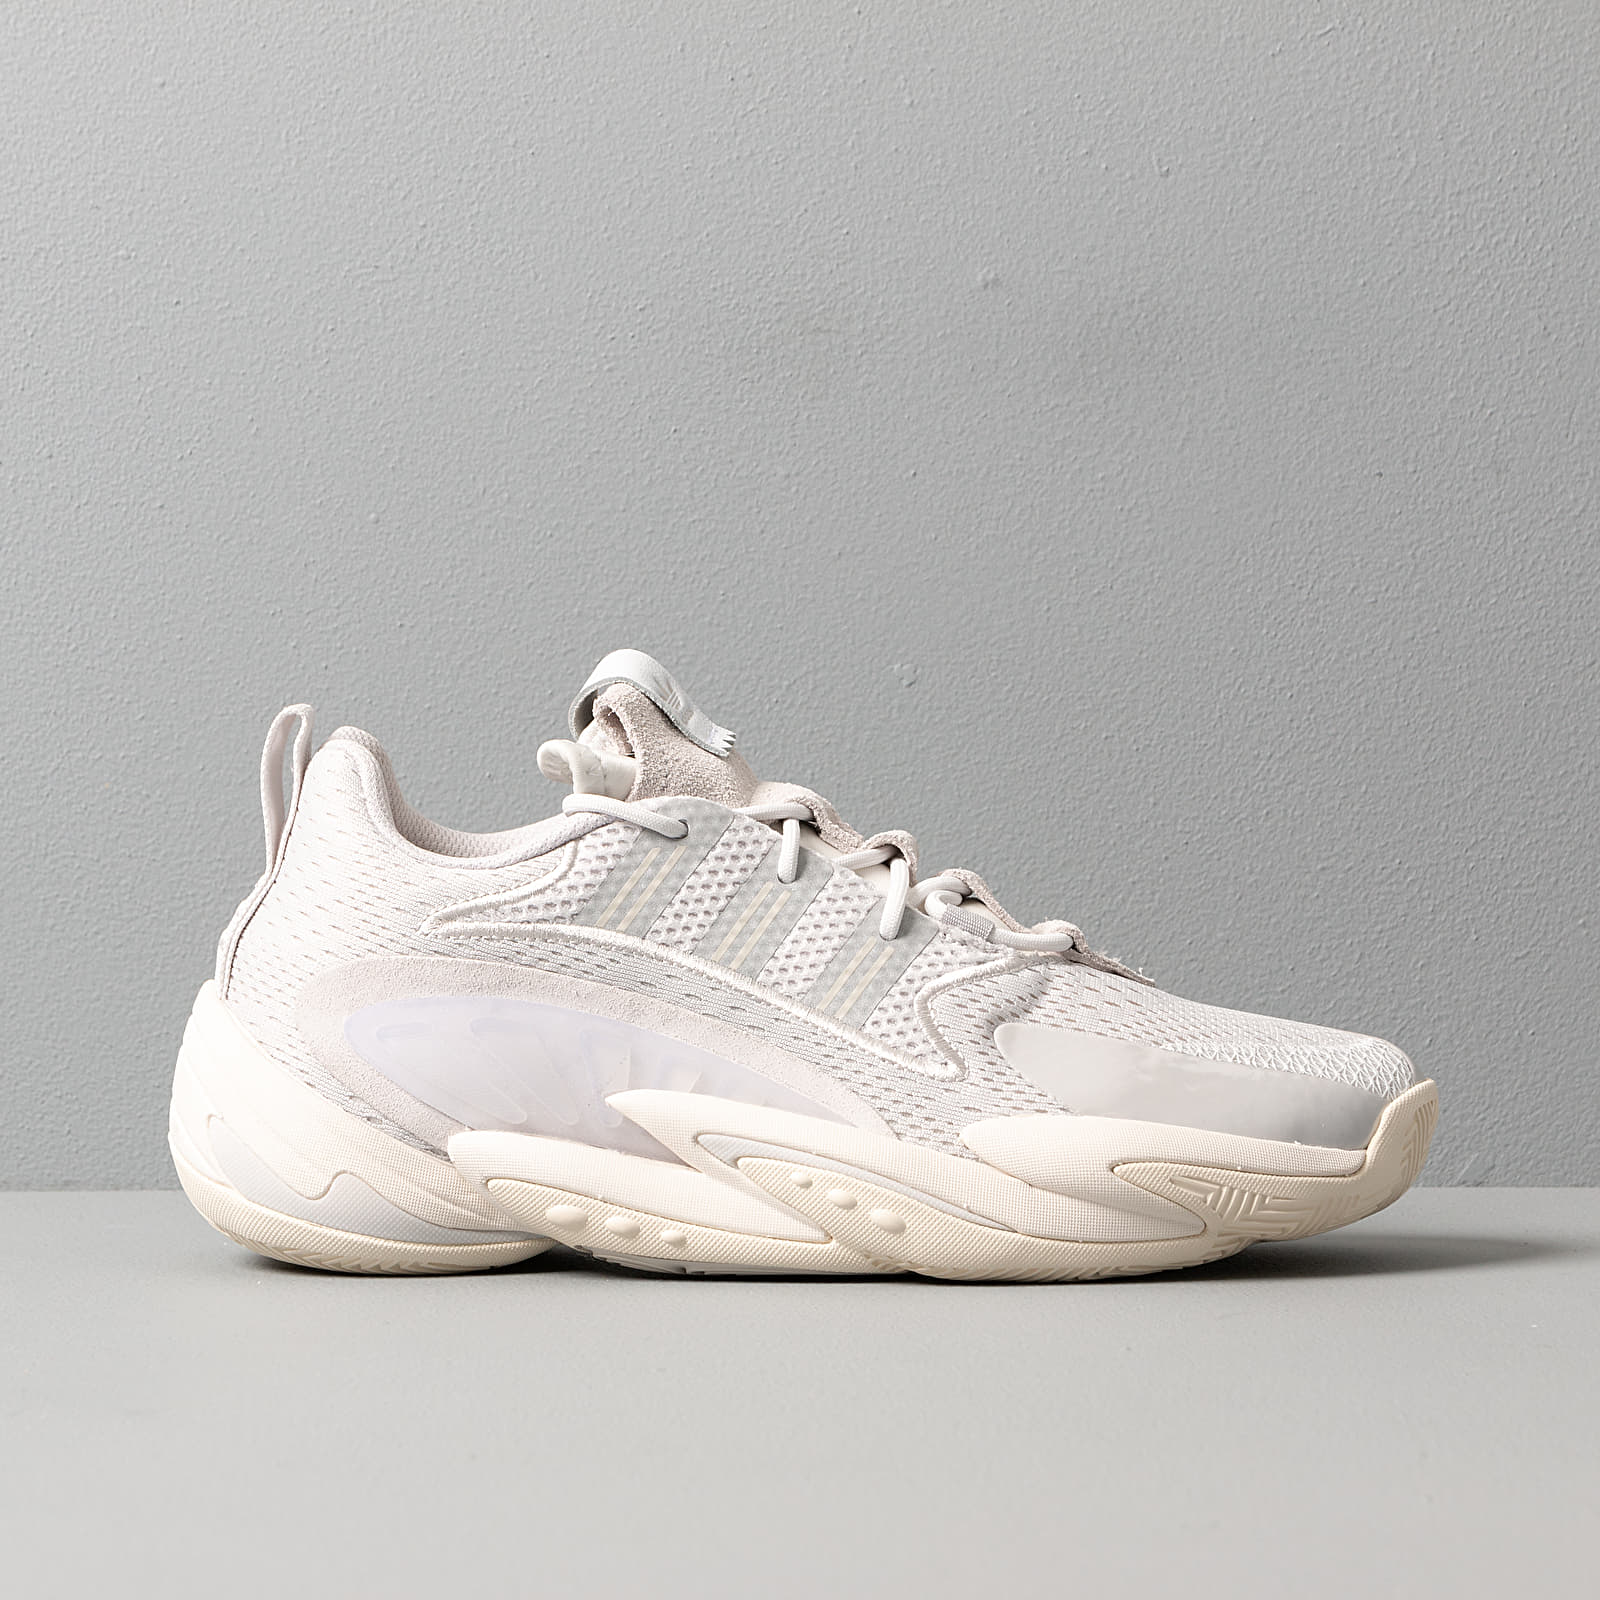 Chaussures et baskets homme adidas Crazy BYW X 2.0 Grey One/ Silver Mate/  Core White | Footshop